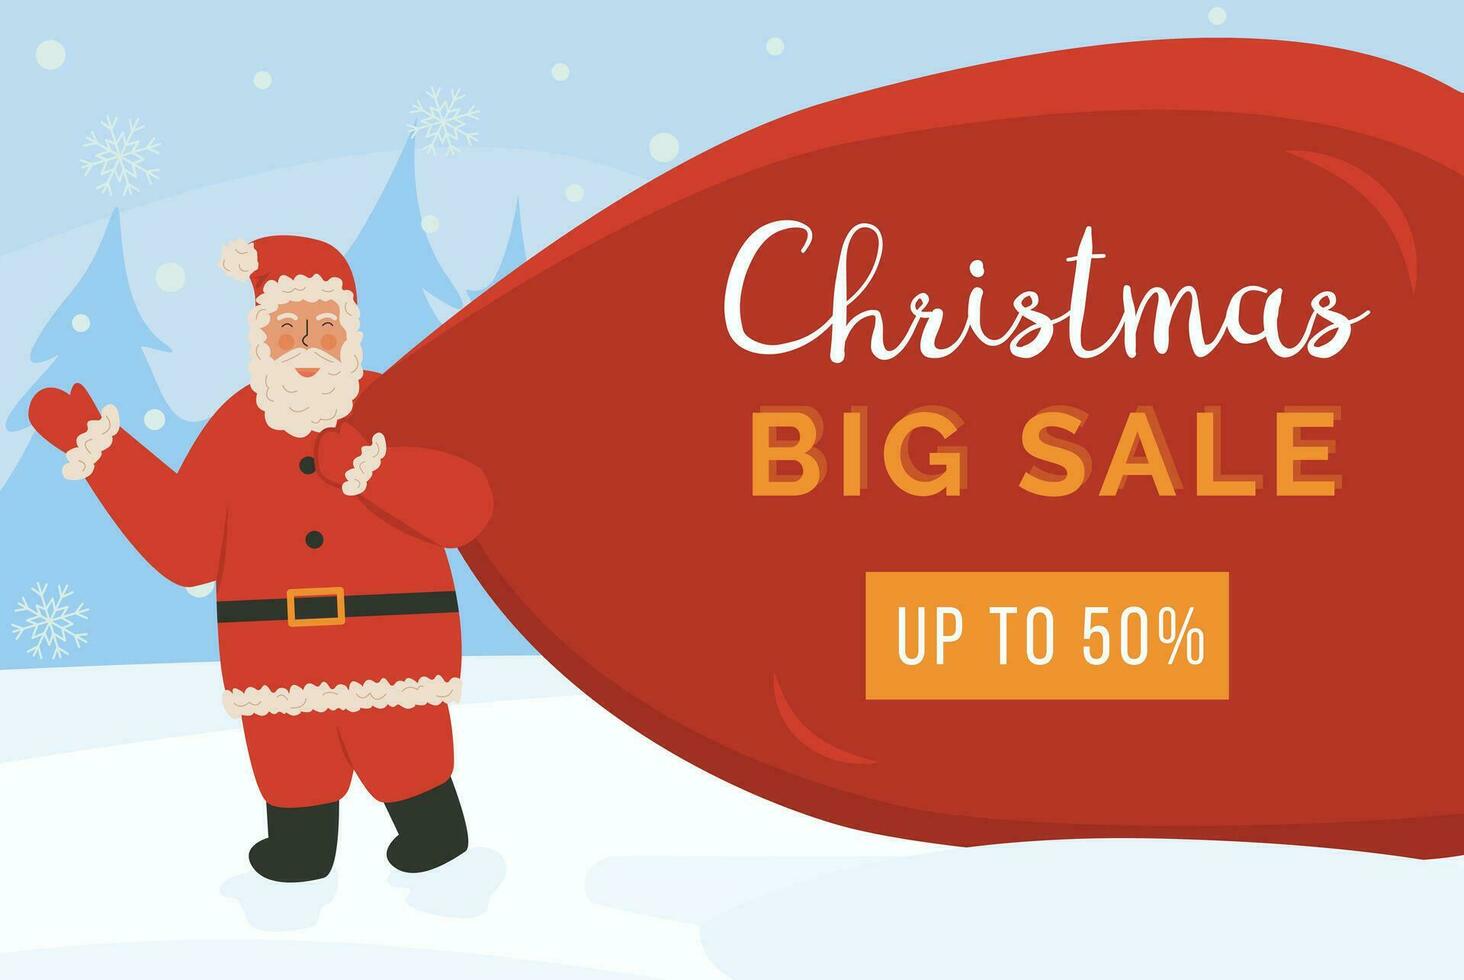 Xmas sale banner with cute waving Santa carrying big gifts bag on winter background. Claus with a huge bag on the run to delivery christmas gifts at snowfall. Vector illustration. Ad or announcement.